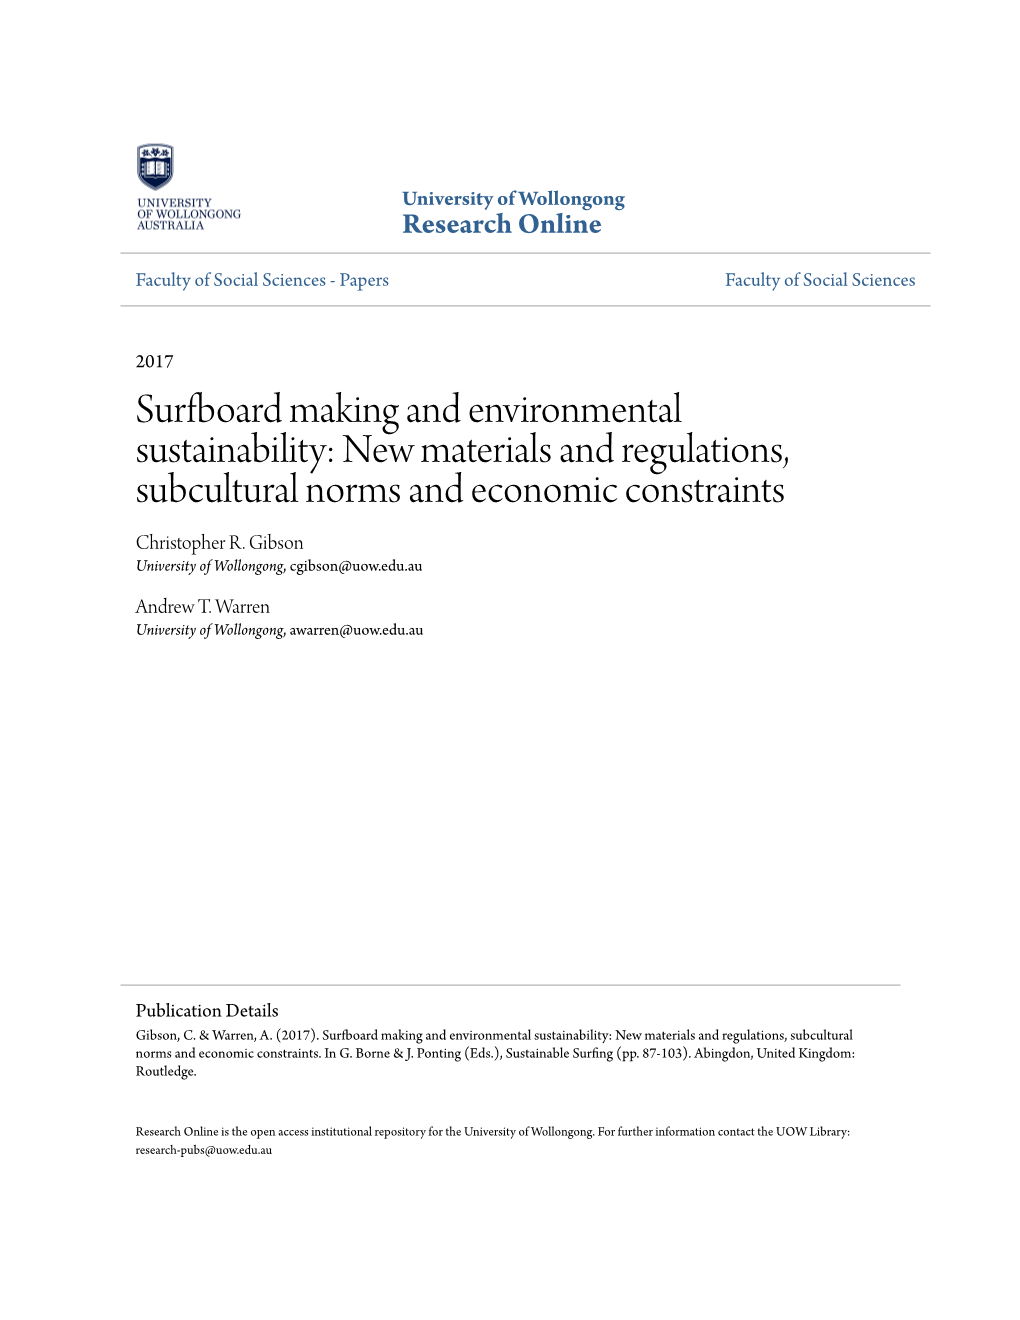 Surfboard Making and Environmental Sustainability: New Materials and Regulations, Subcultural Norms and Economic Constraints Christopher R